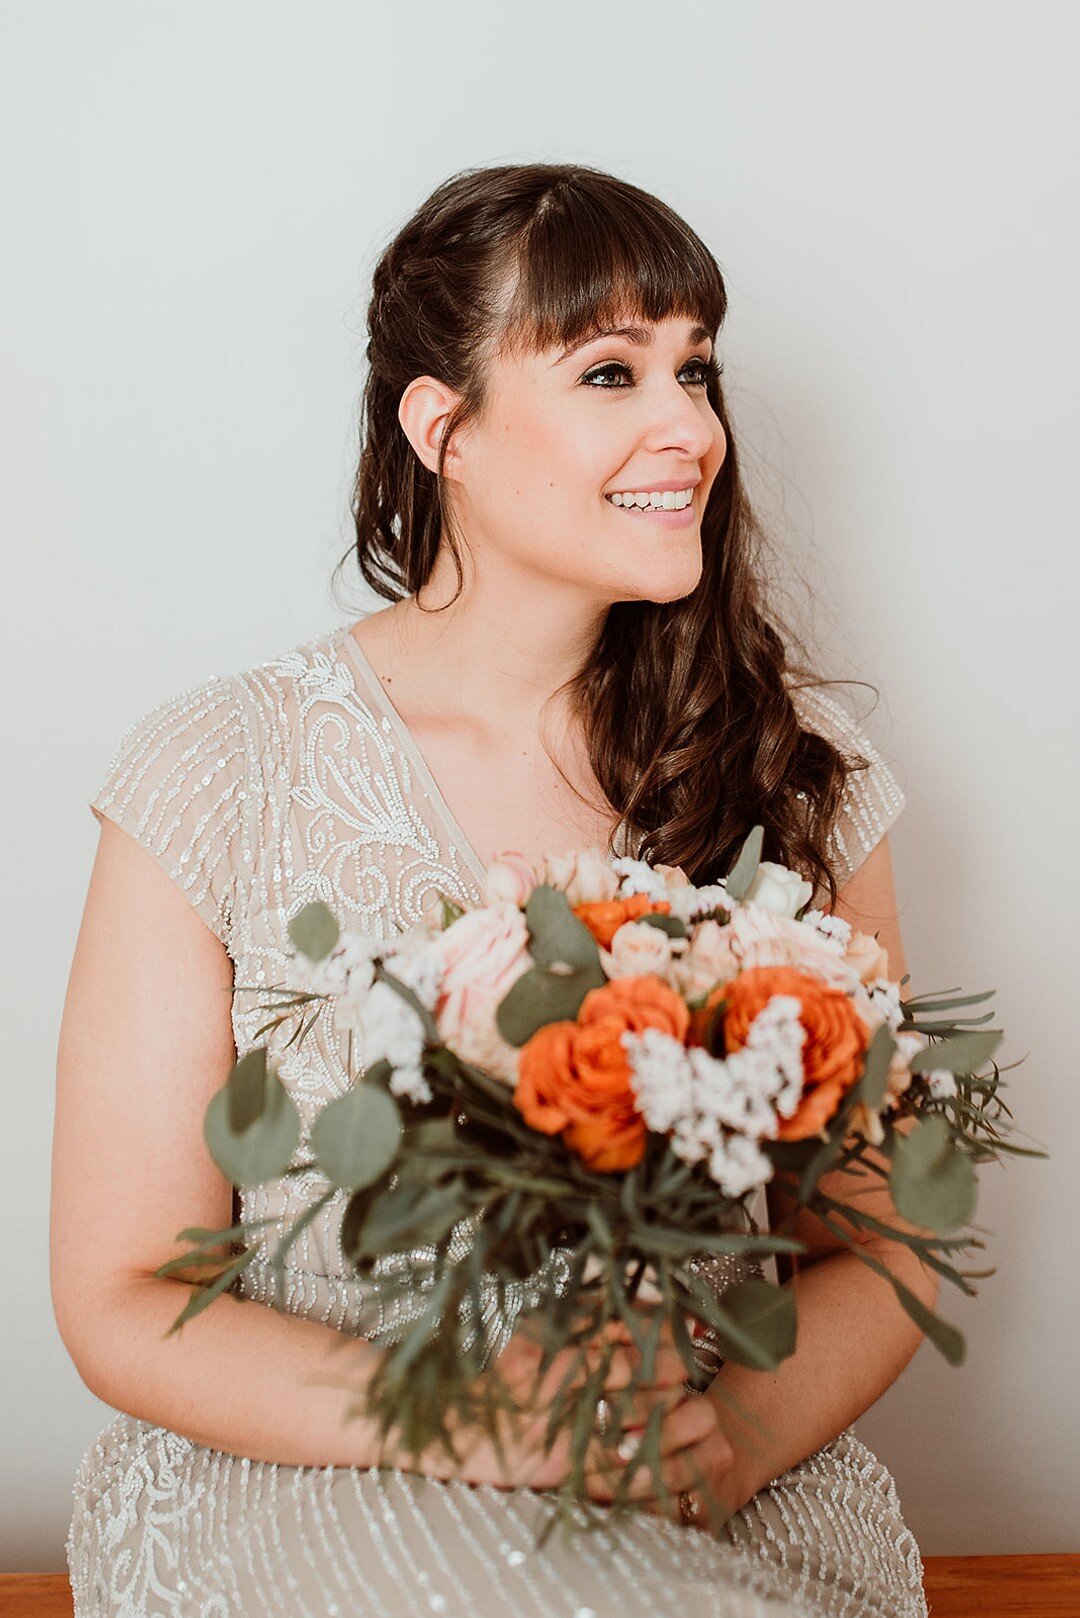 Orange and white wedding bouquet: Low-Key &amp; High Style Chicago Wedding captured by Emily-Melissa Photography. Find more creative wedding ideas at CHItheeWED.com!